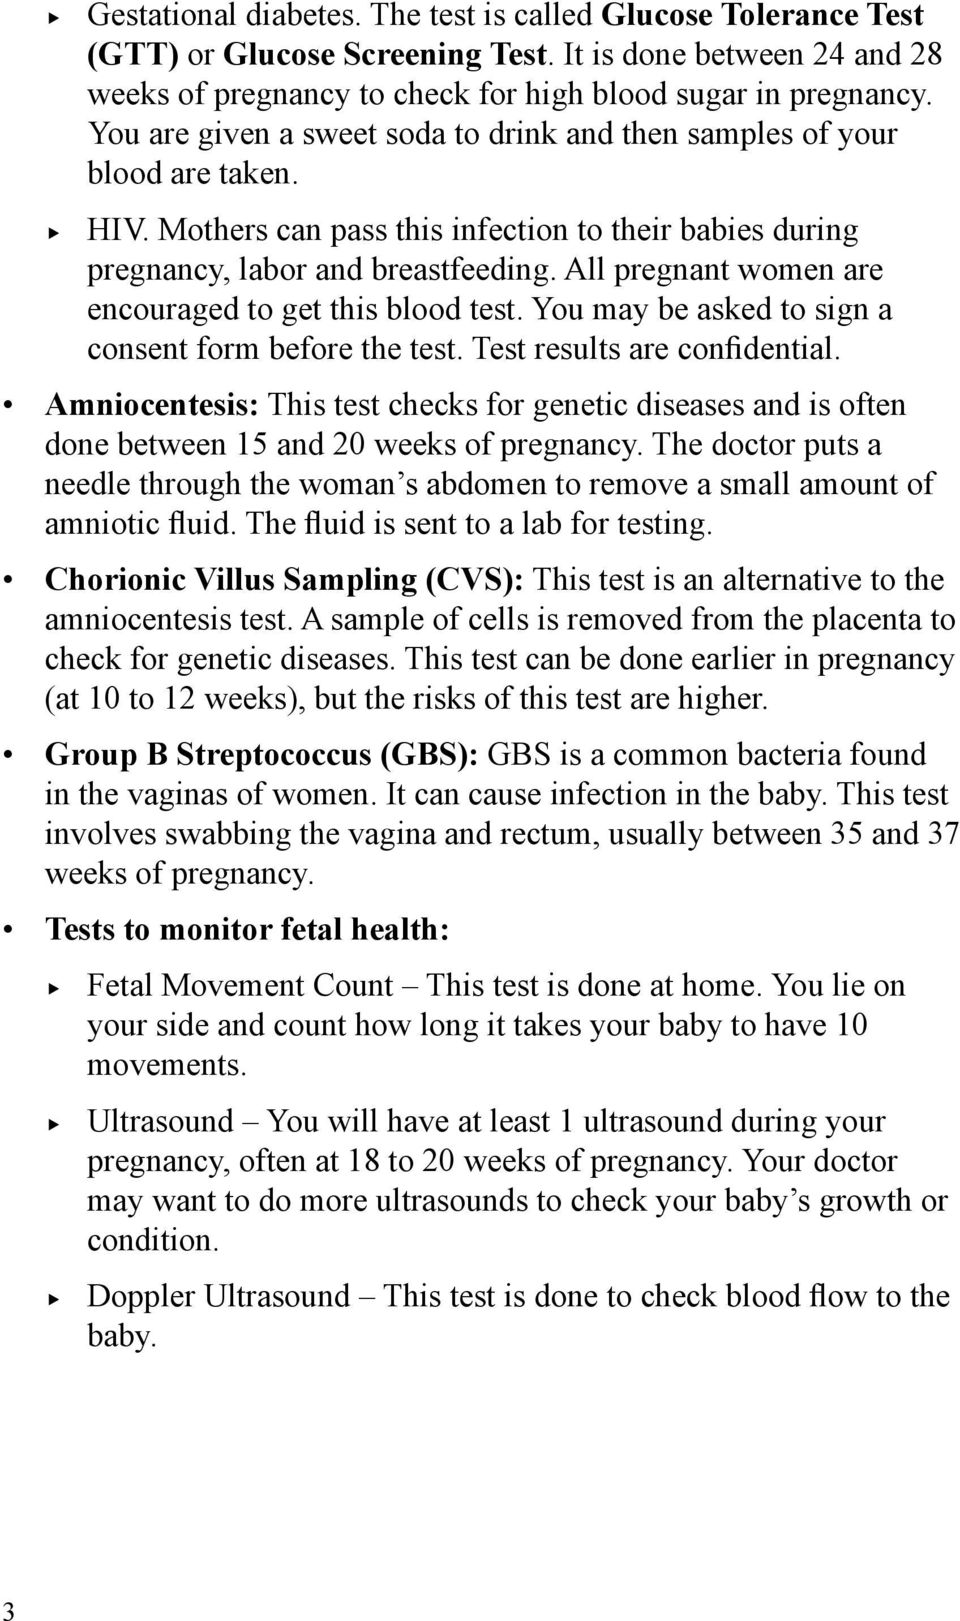 All pregnant women are encouraged to get this blood test. You may be asked to sign a consent form before the test. Test results are confidential.